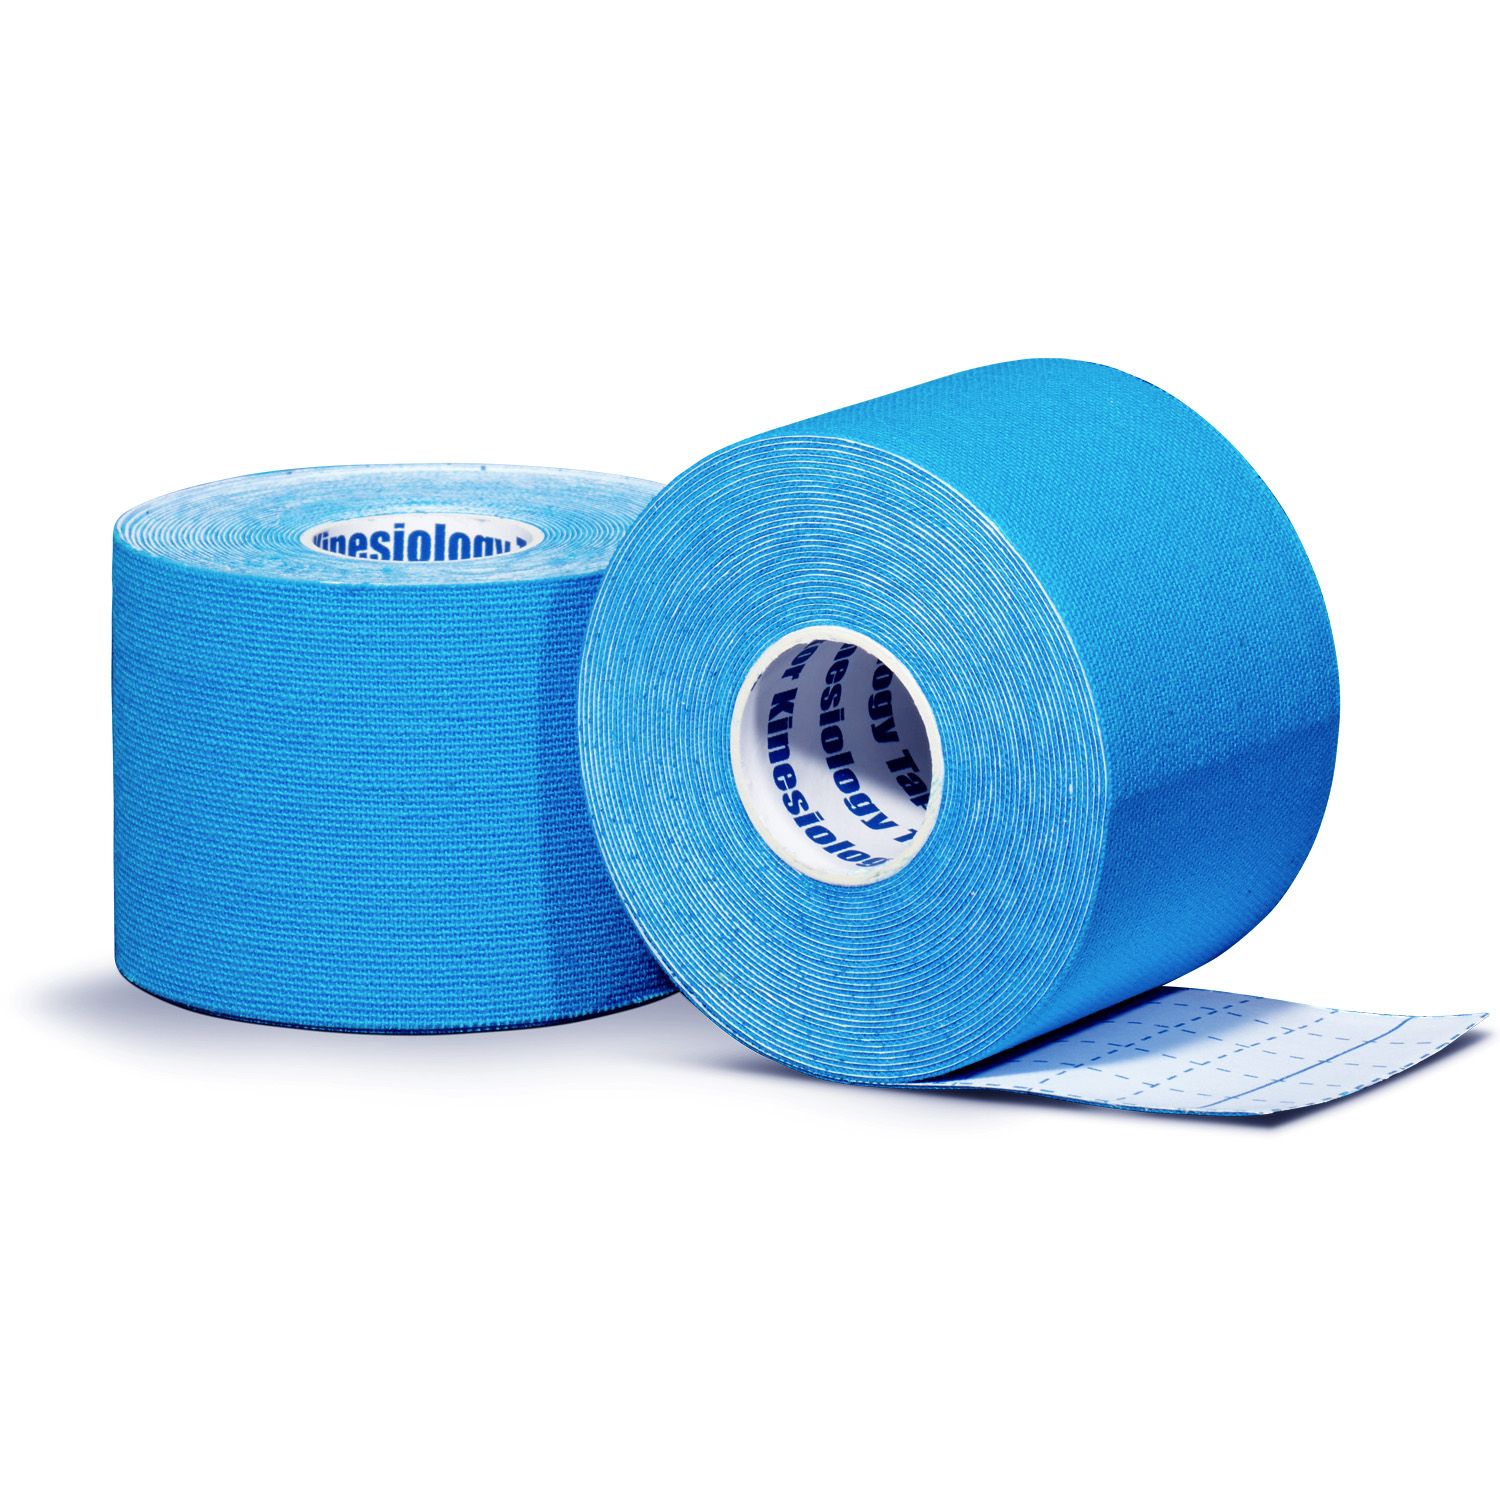 Kinesiology tape per roll blue front and back view